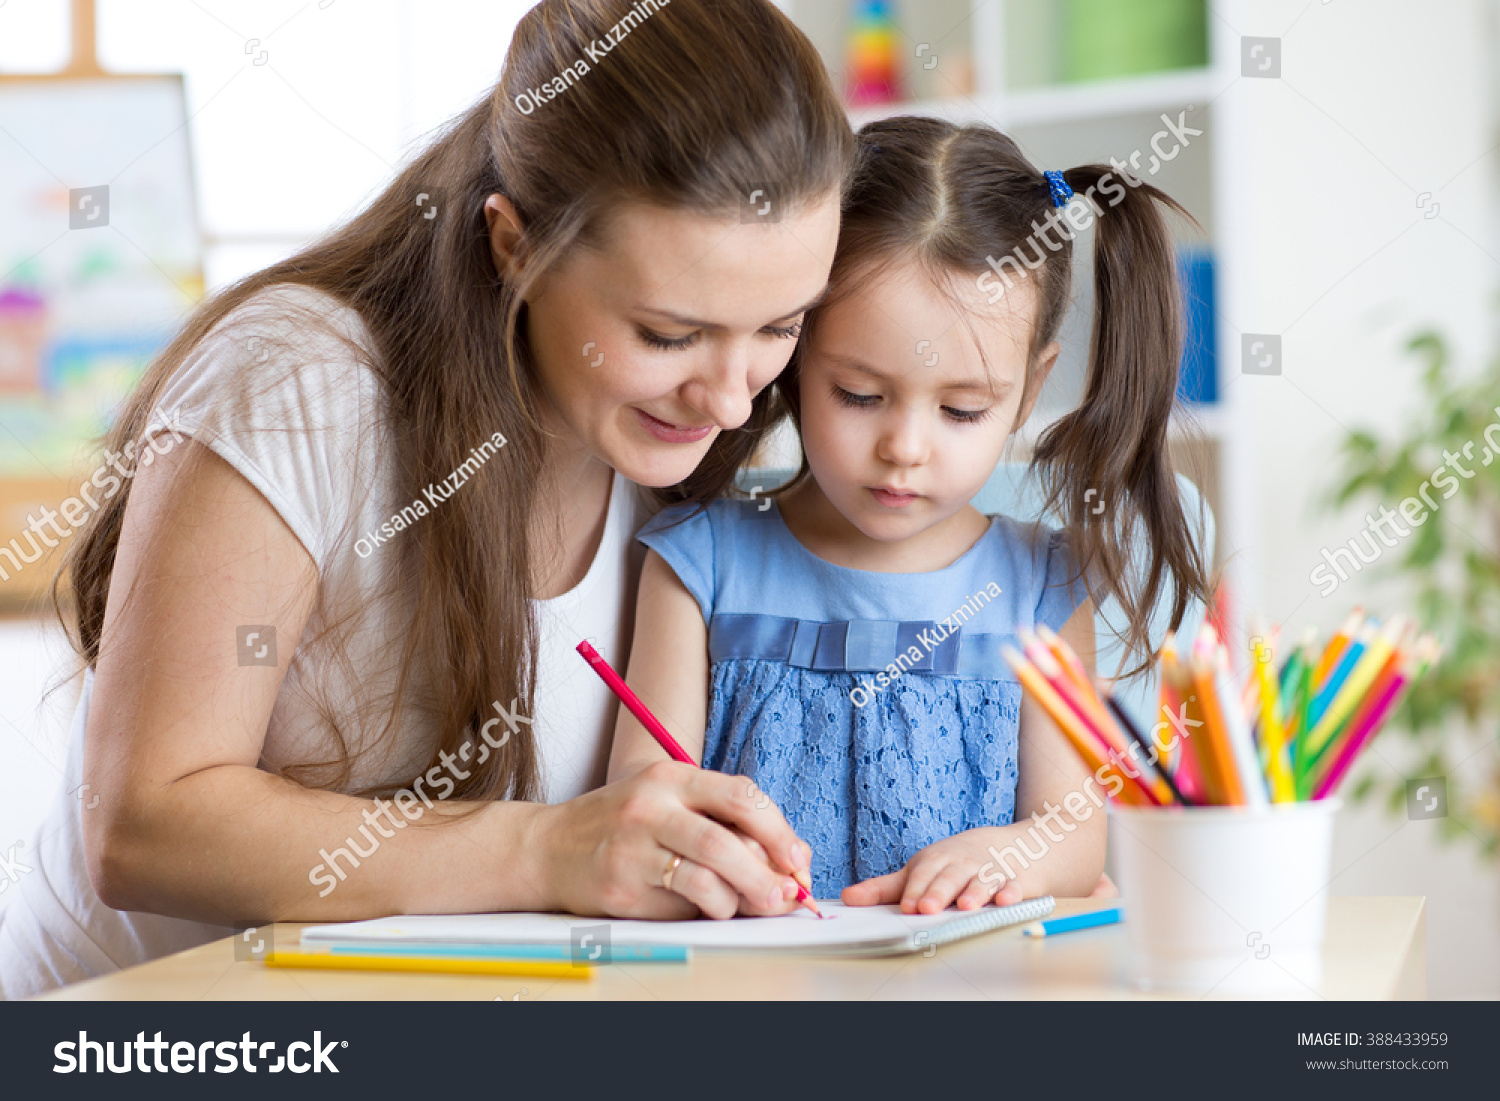 mother and her child pencil together #388433959